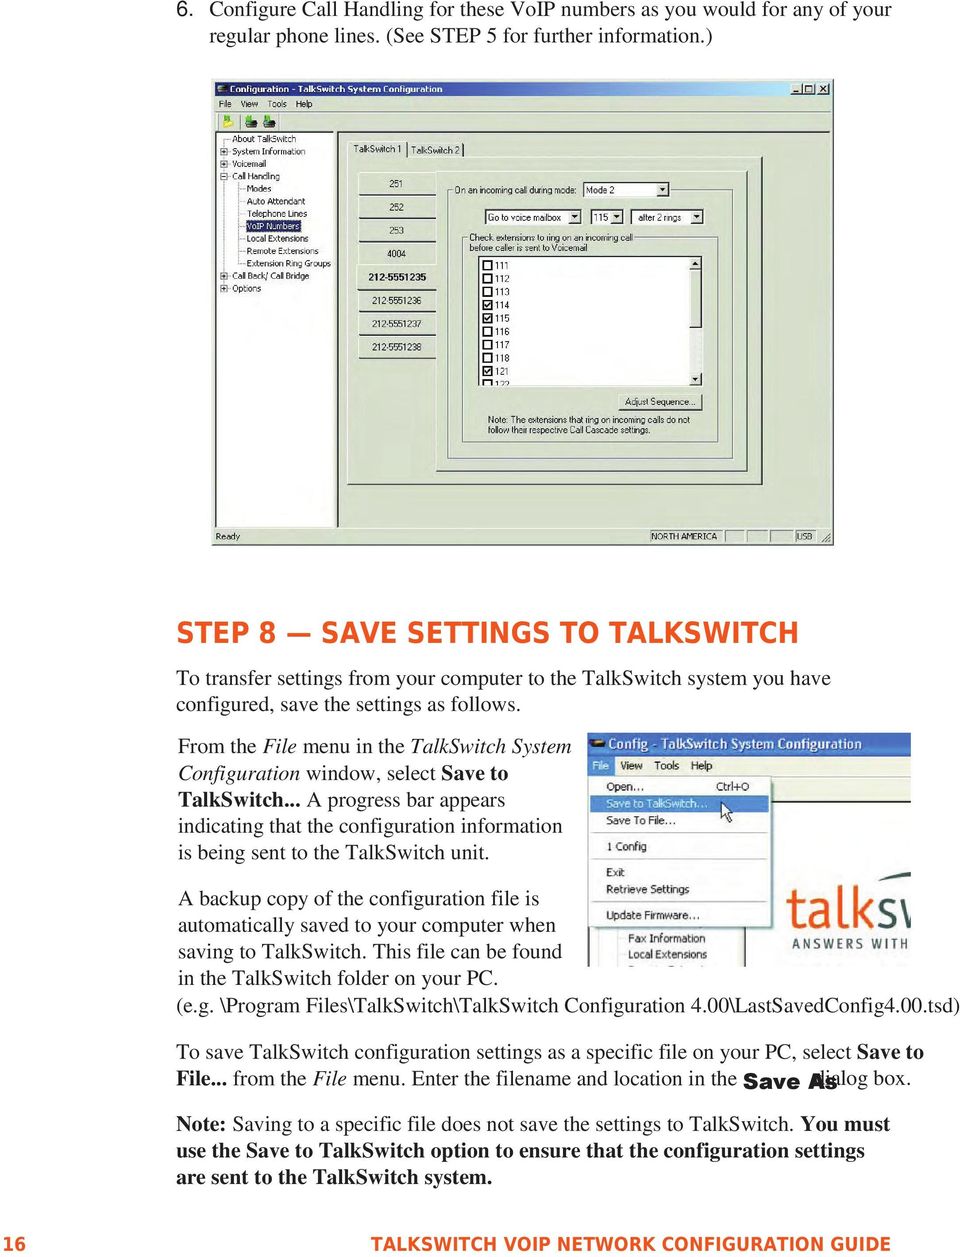 From the File menu in the TalkSwitch System Configuration window, select Save to TalkSwitch... A progress bar appears indicating that the configuration information is being sent to the TalkSwitch unit.